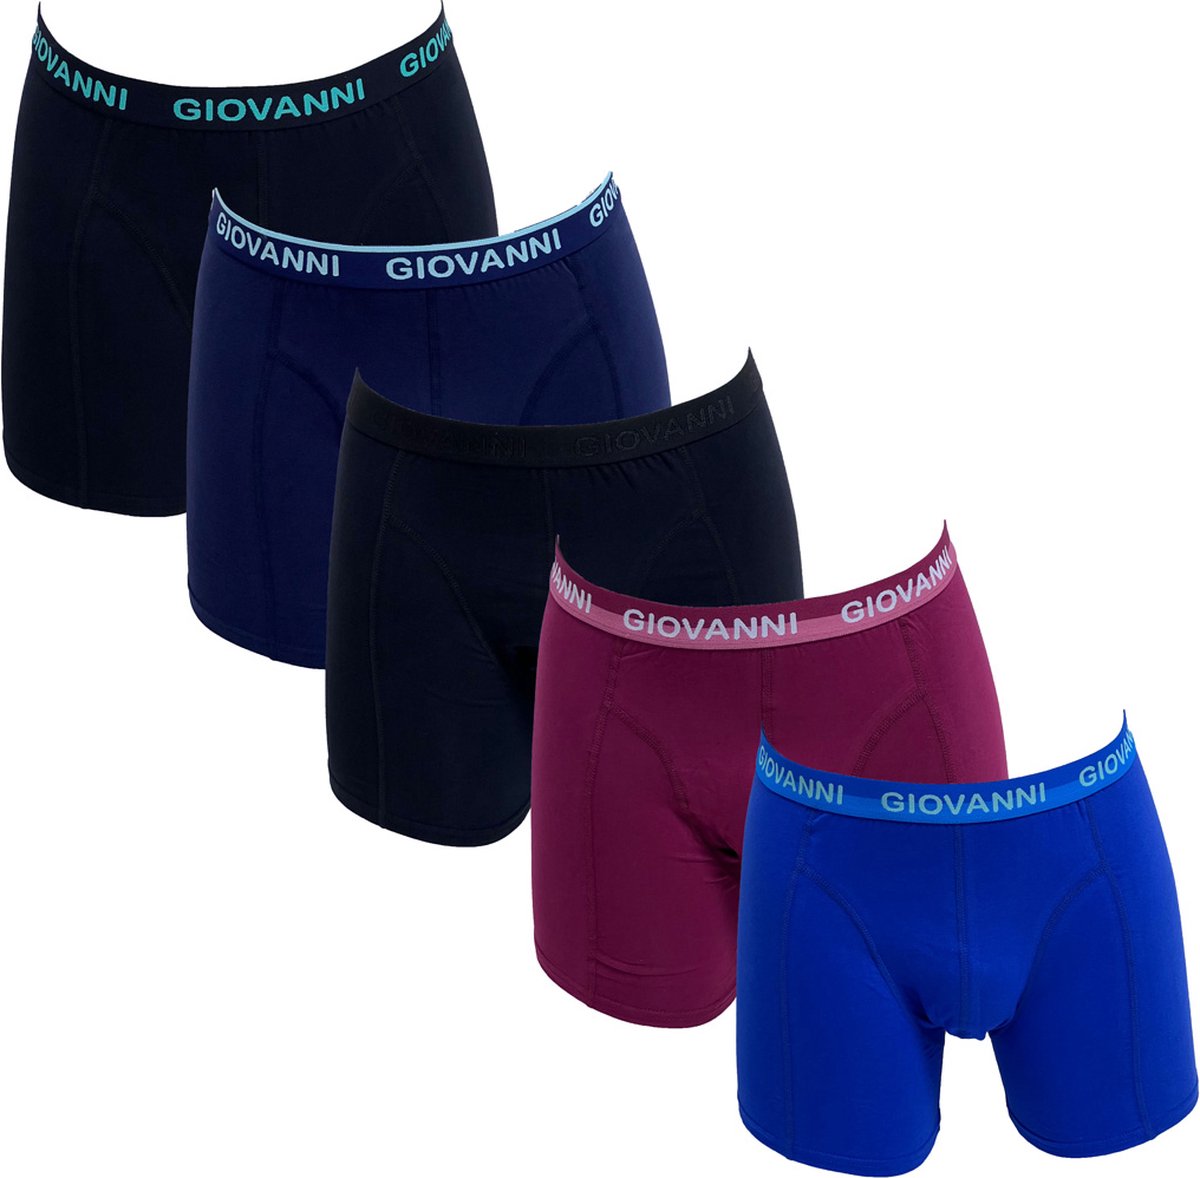 Giovanni Heren Boxershorts 5Pack Mode M34 A Maat M